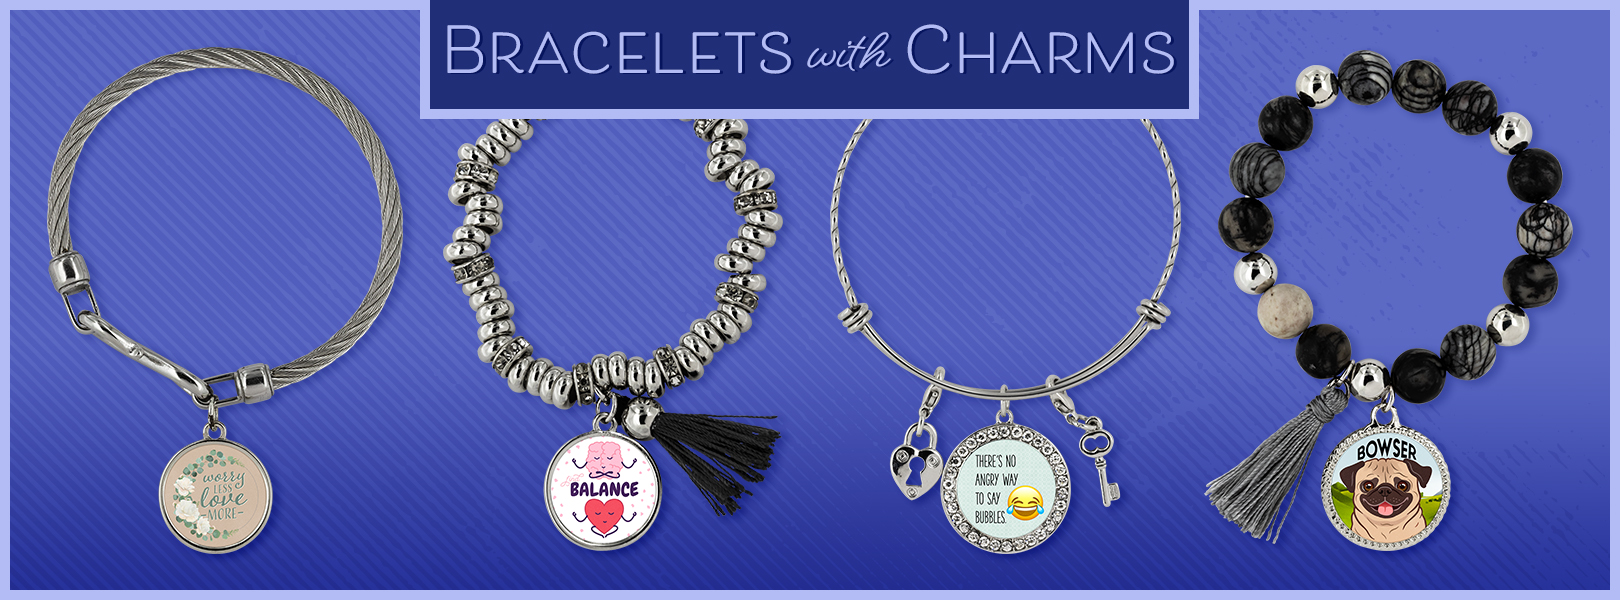 Beautiful Bracelets With Charms